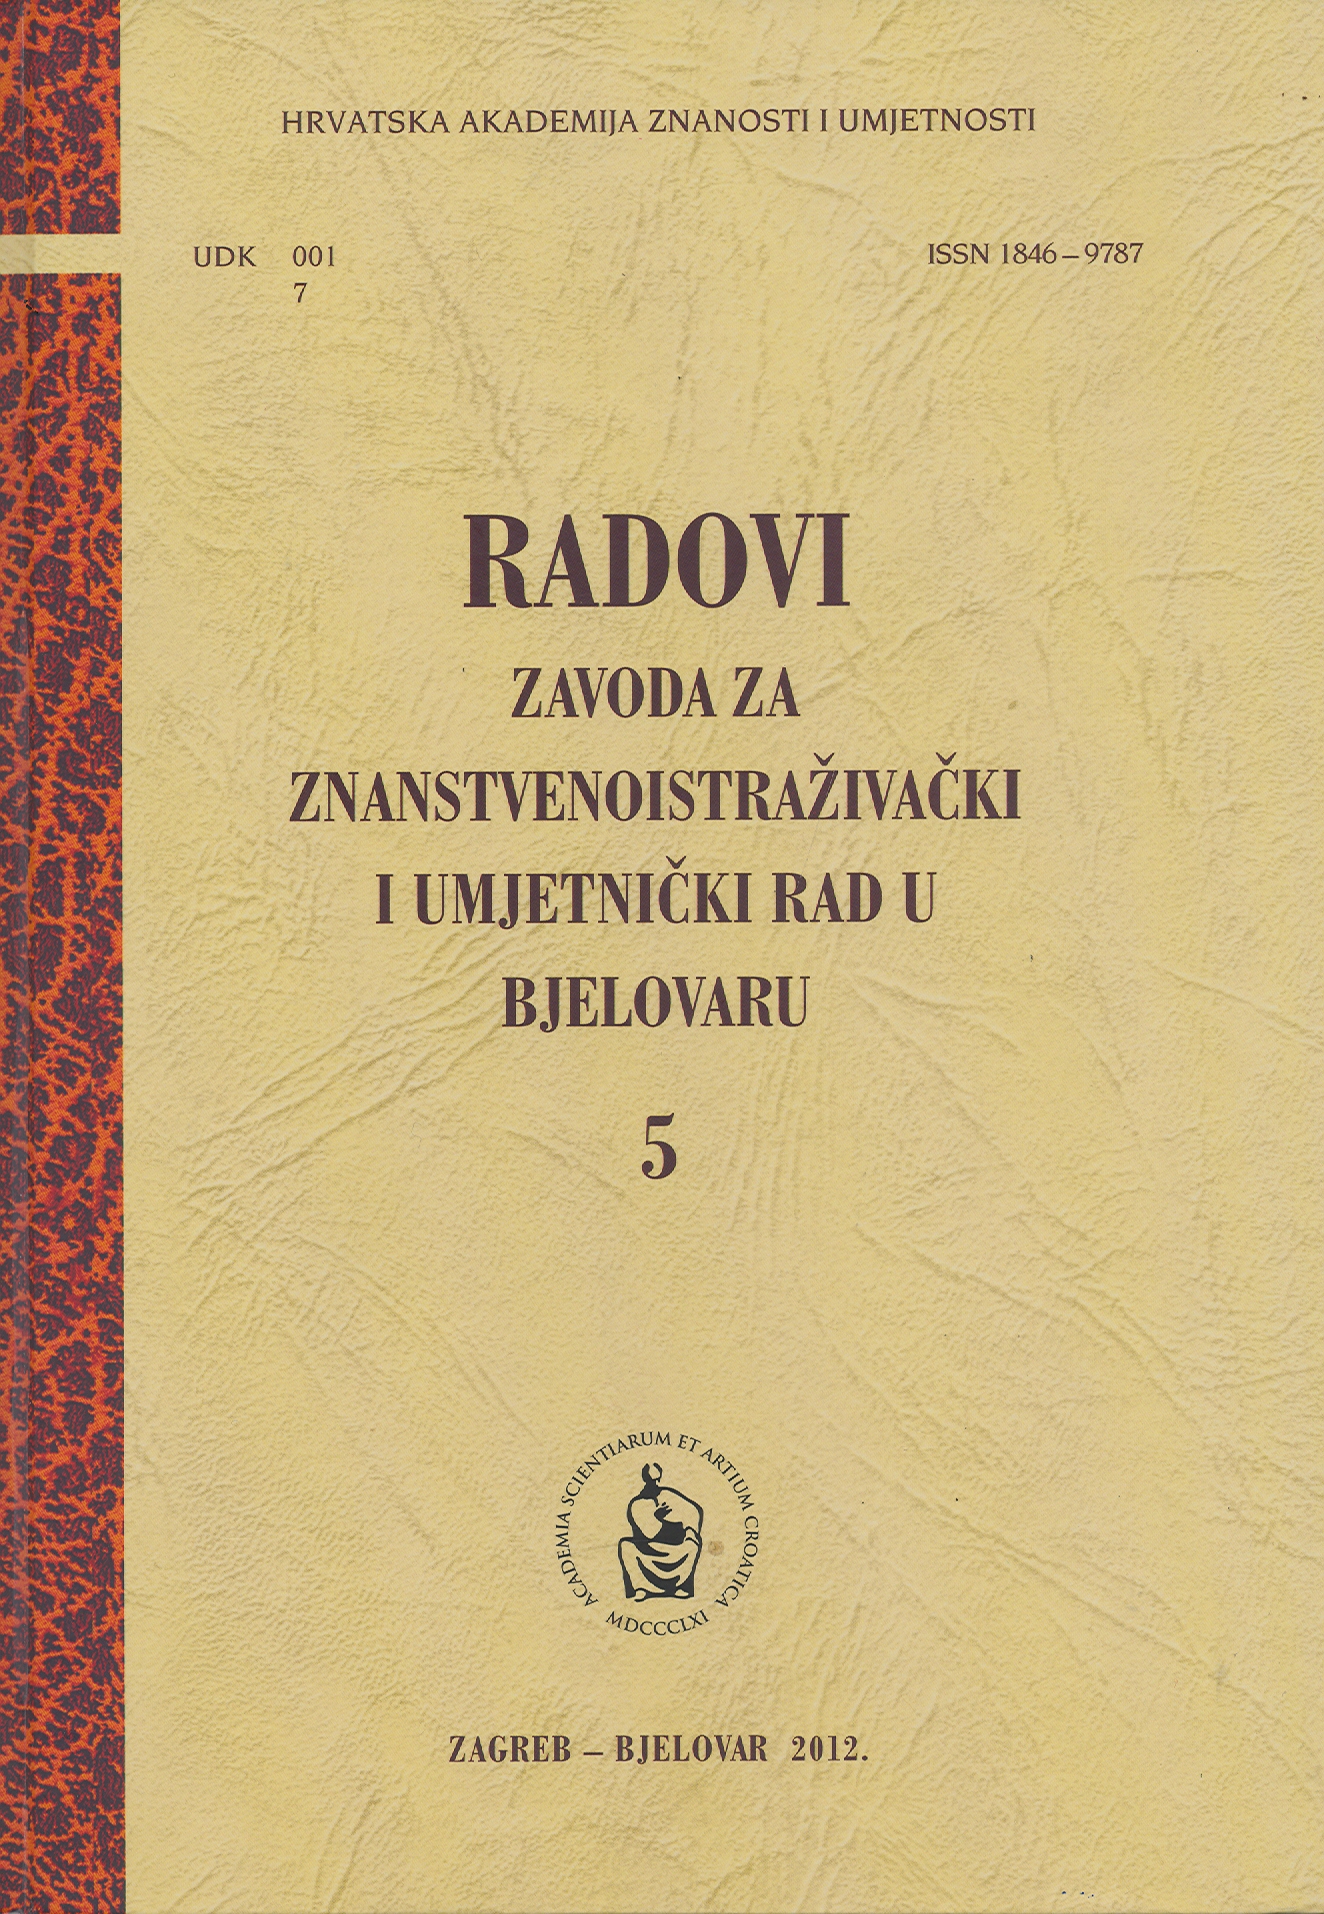 The Bjelovar Fair-Related Regulations of 1862 Cover Image